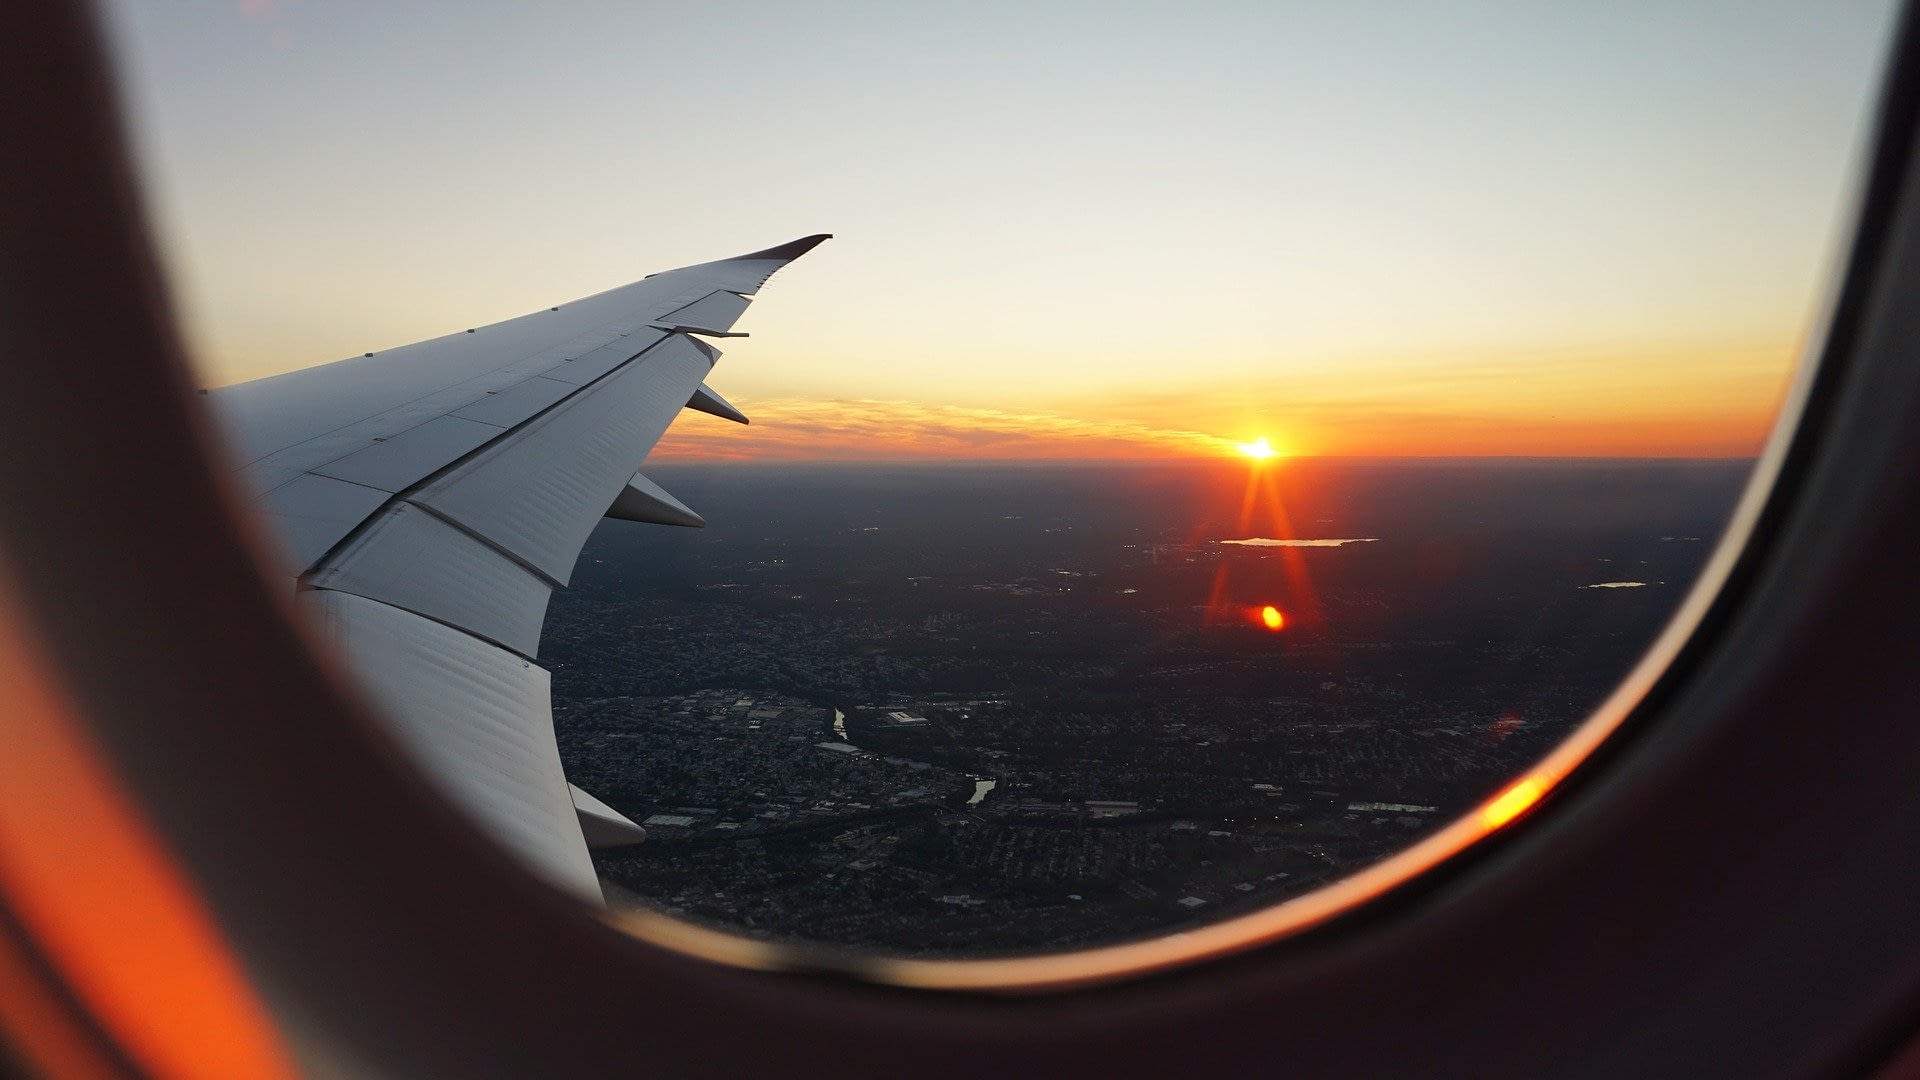 Image: Image taken from inside a plane of a plane wing with a sunset behind it